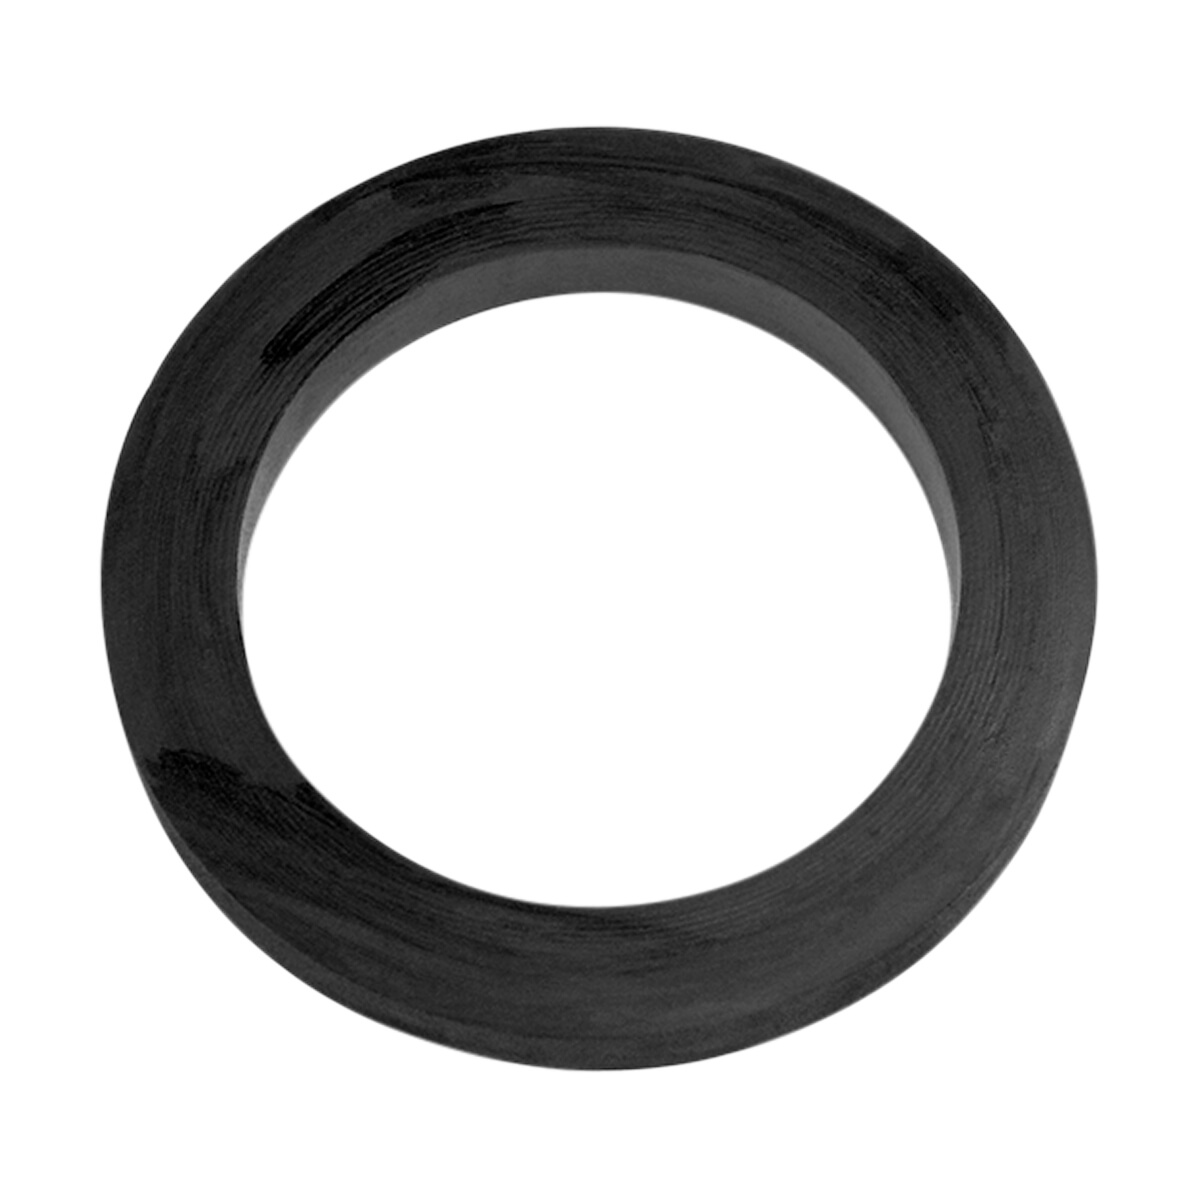 EPDM Camlock Replacement Gasket  - 3-in